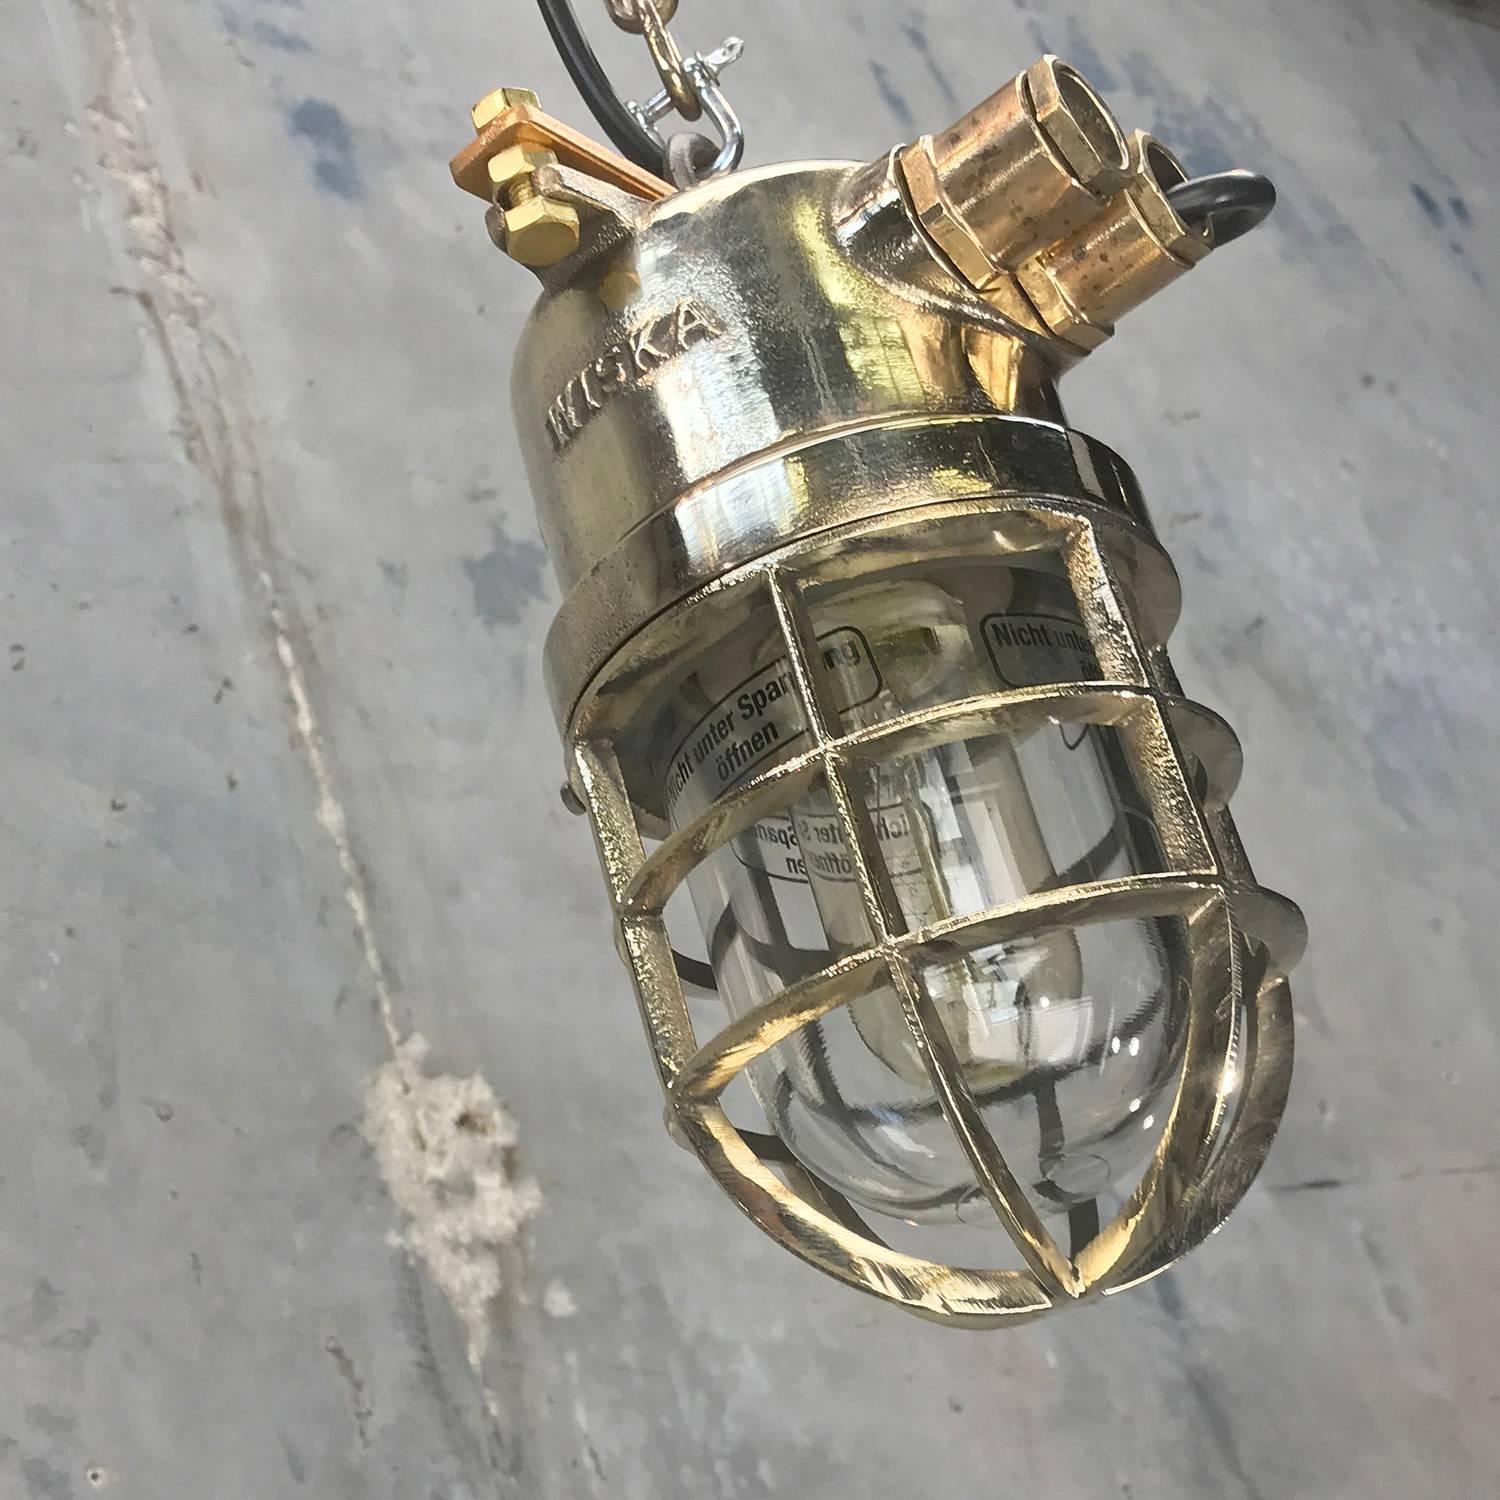 Late Century German Cast Brass and Glass Shade Explosion Proof Pendant Light For Sale 8